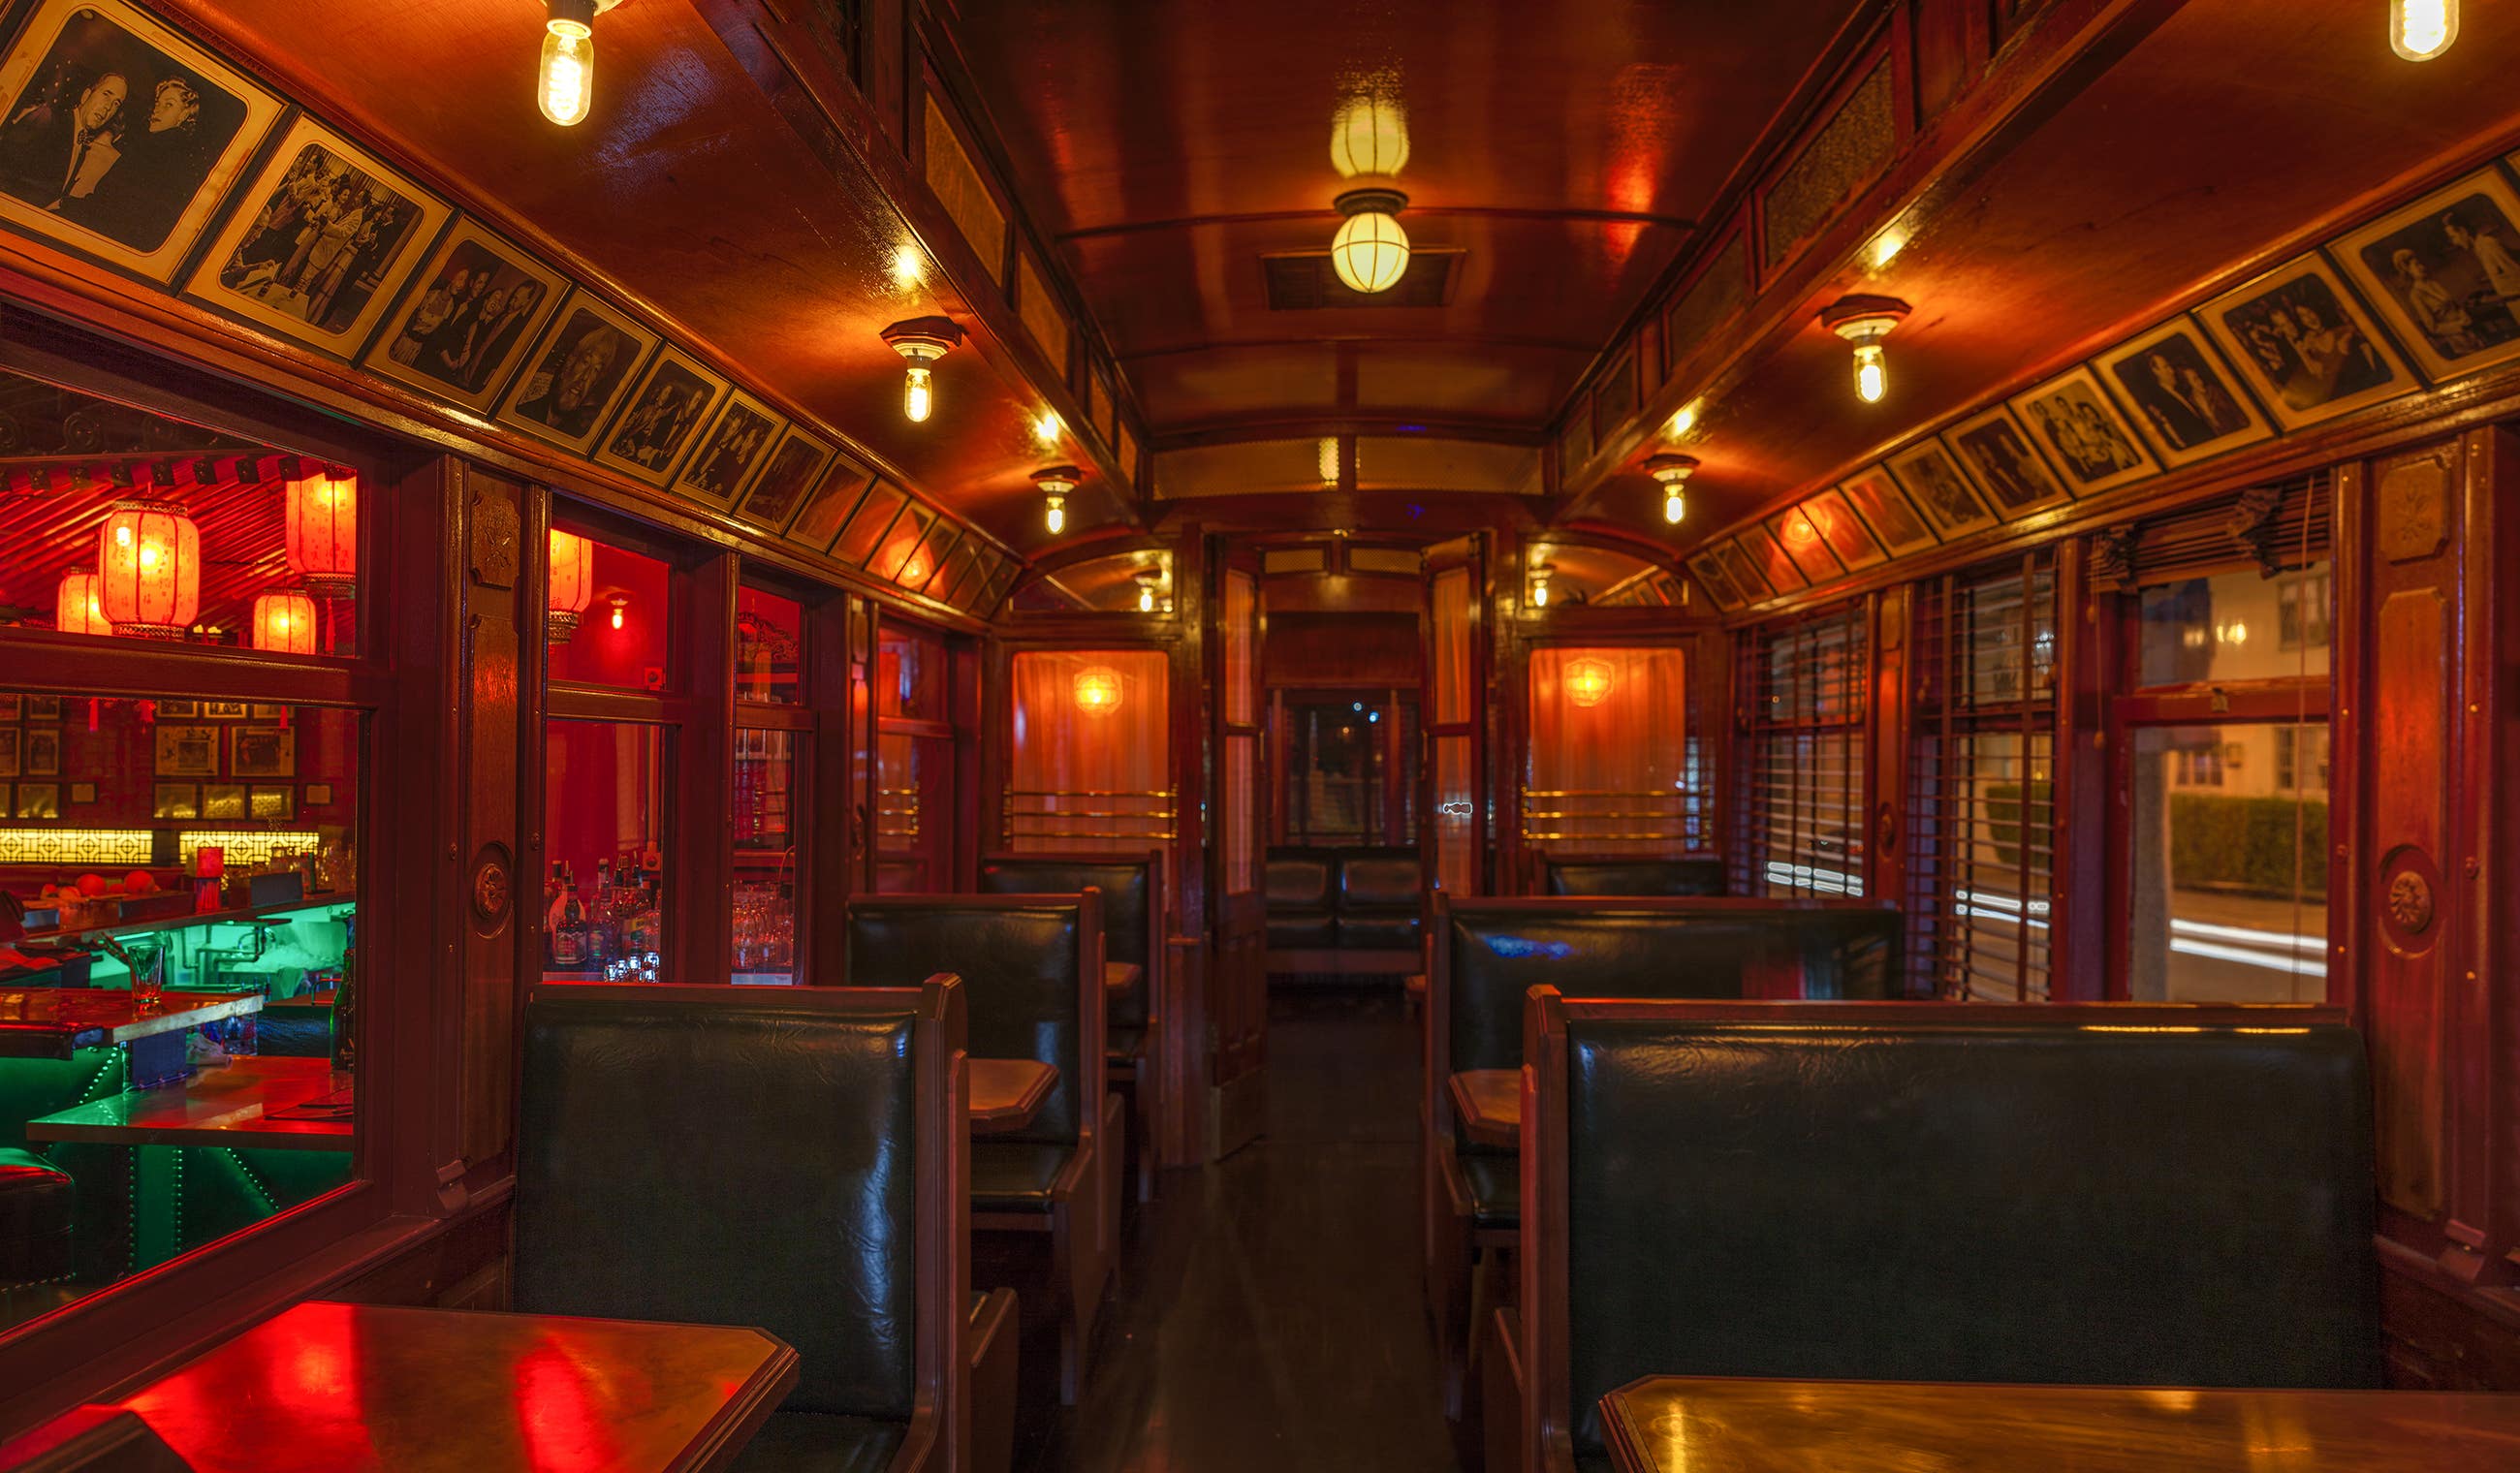 Interior of the Pacific Electric Red Car trolley at the Formosa Cafe